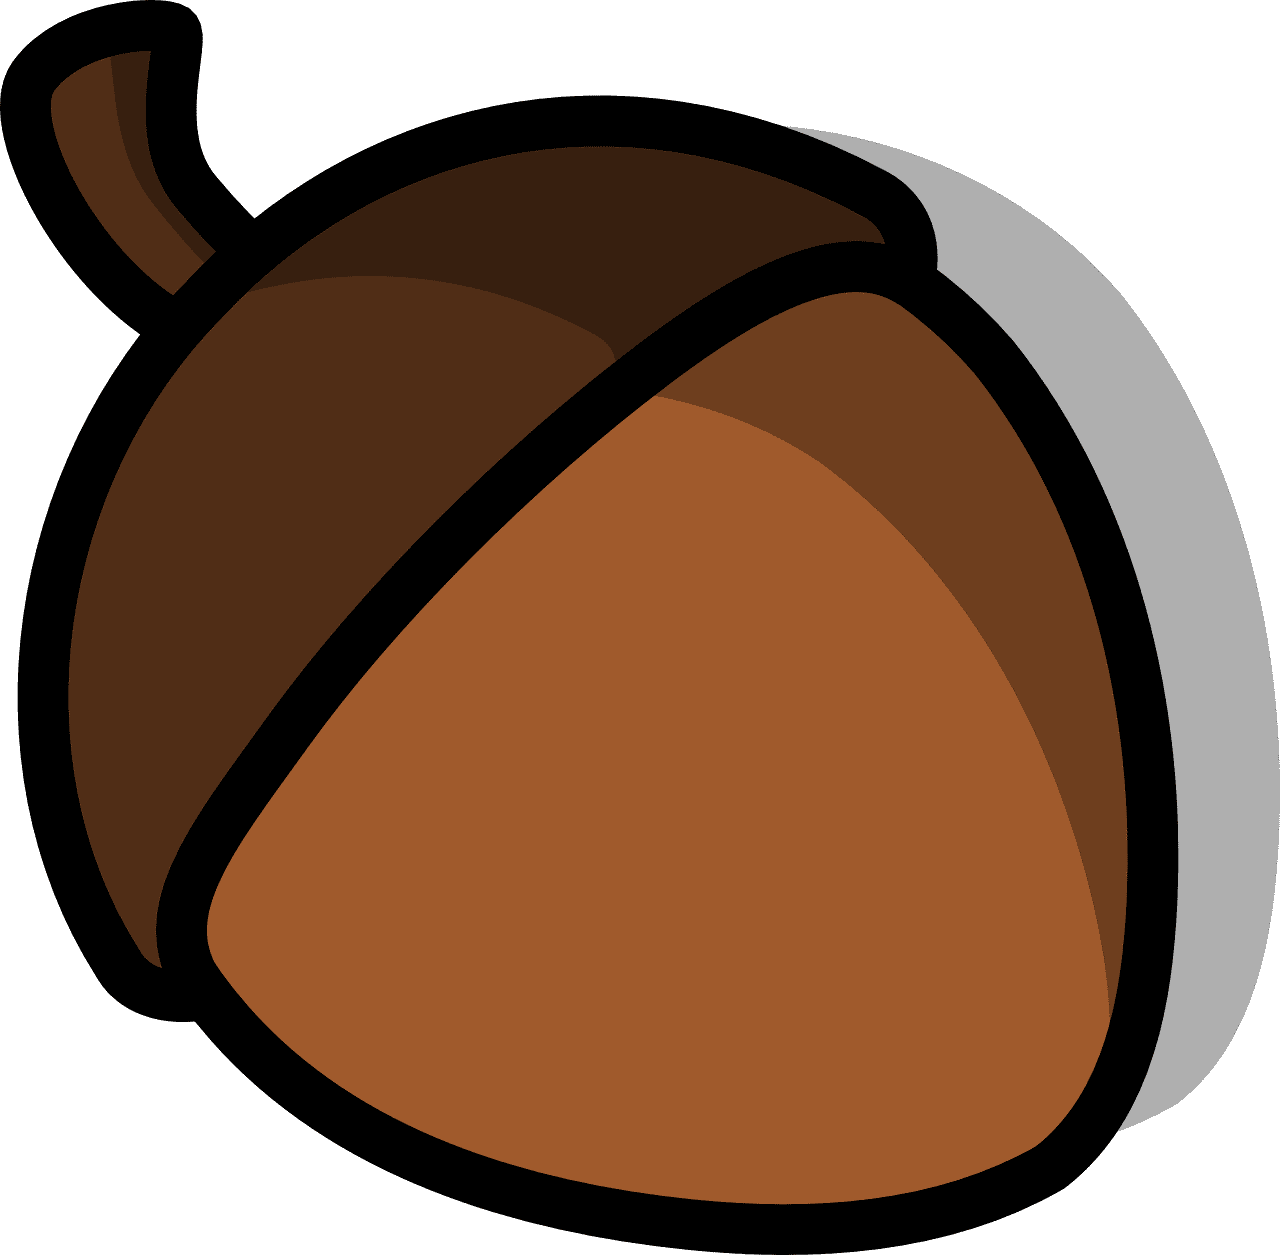 Acorn nut seed vector graphic clipart